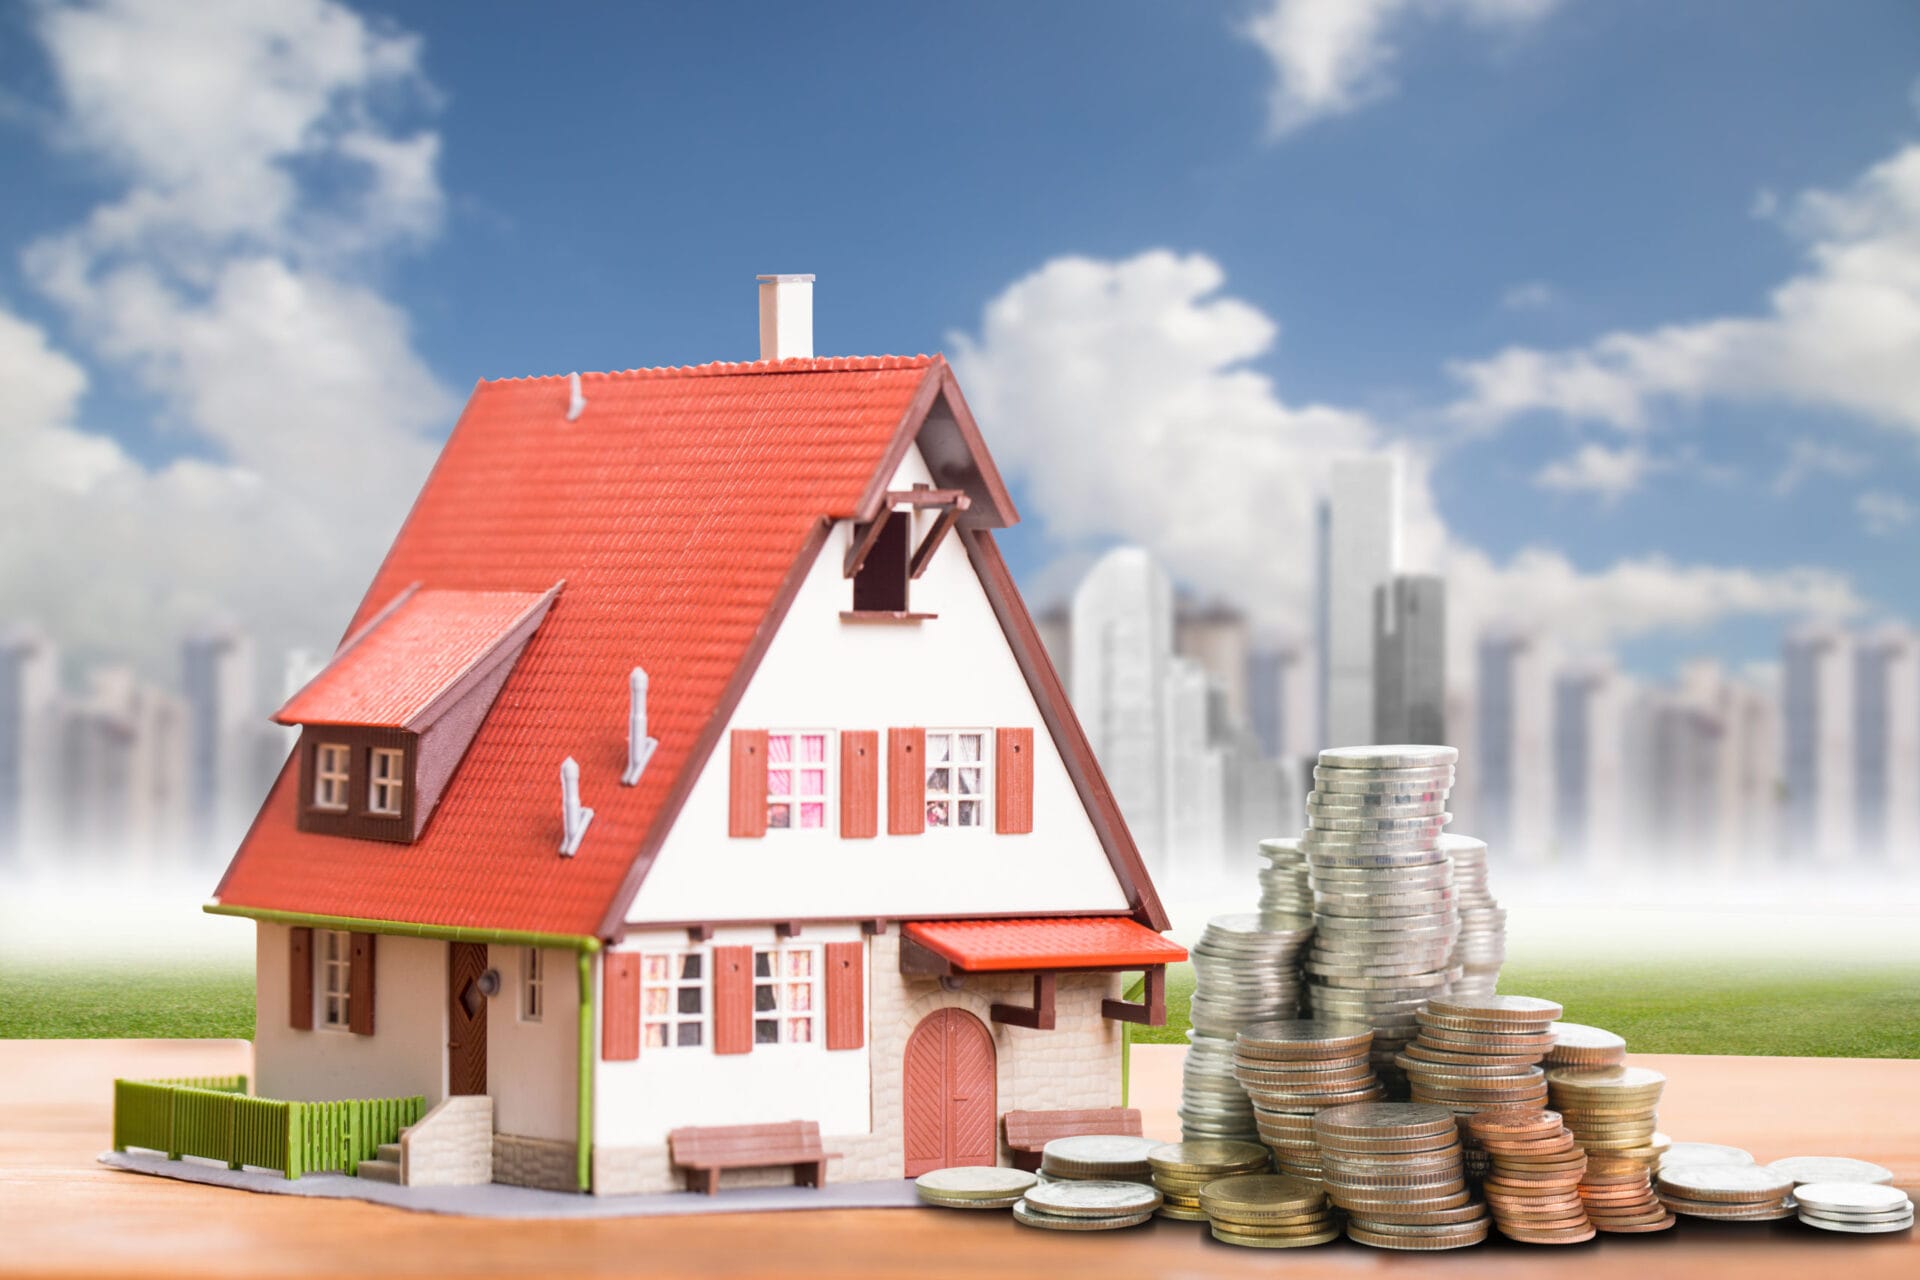 Toy house with money. Investment concept